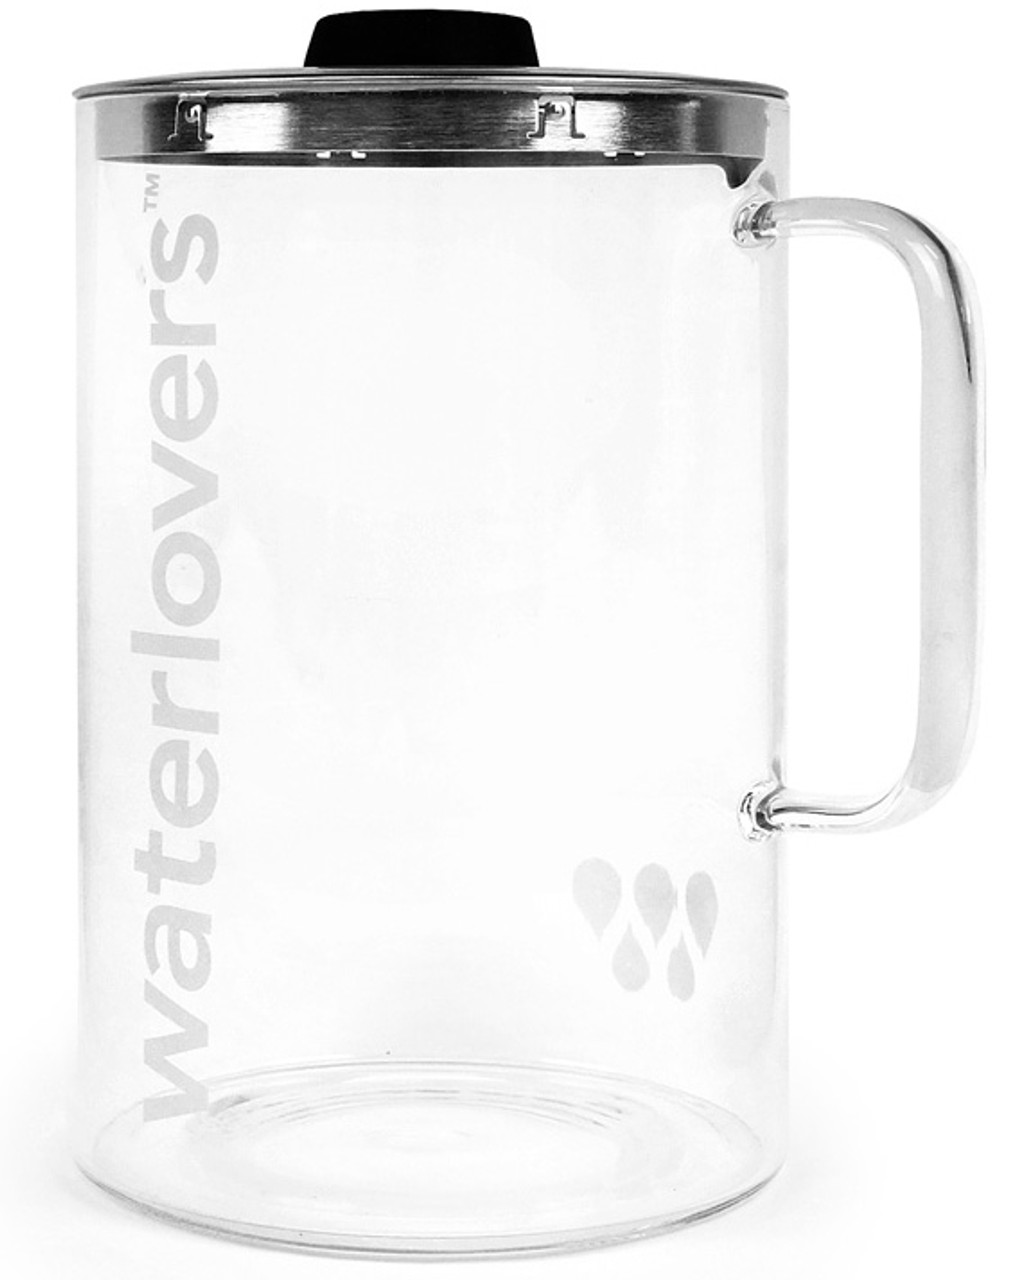 Waterlovers - Cleaning the Water Distiller 